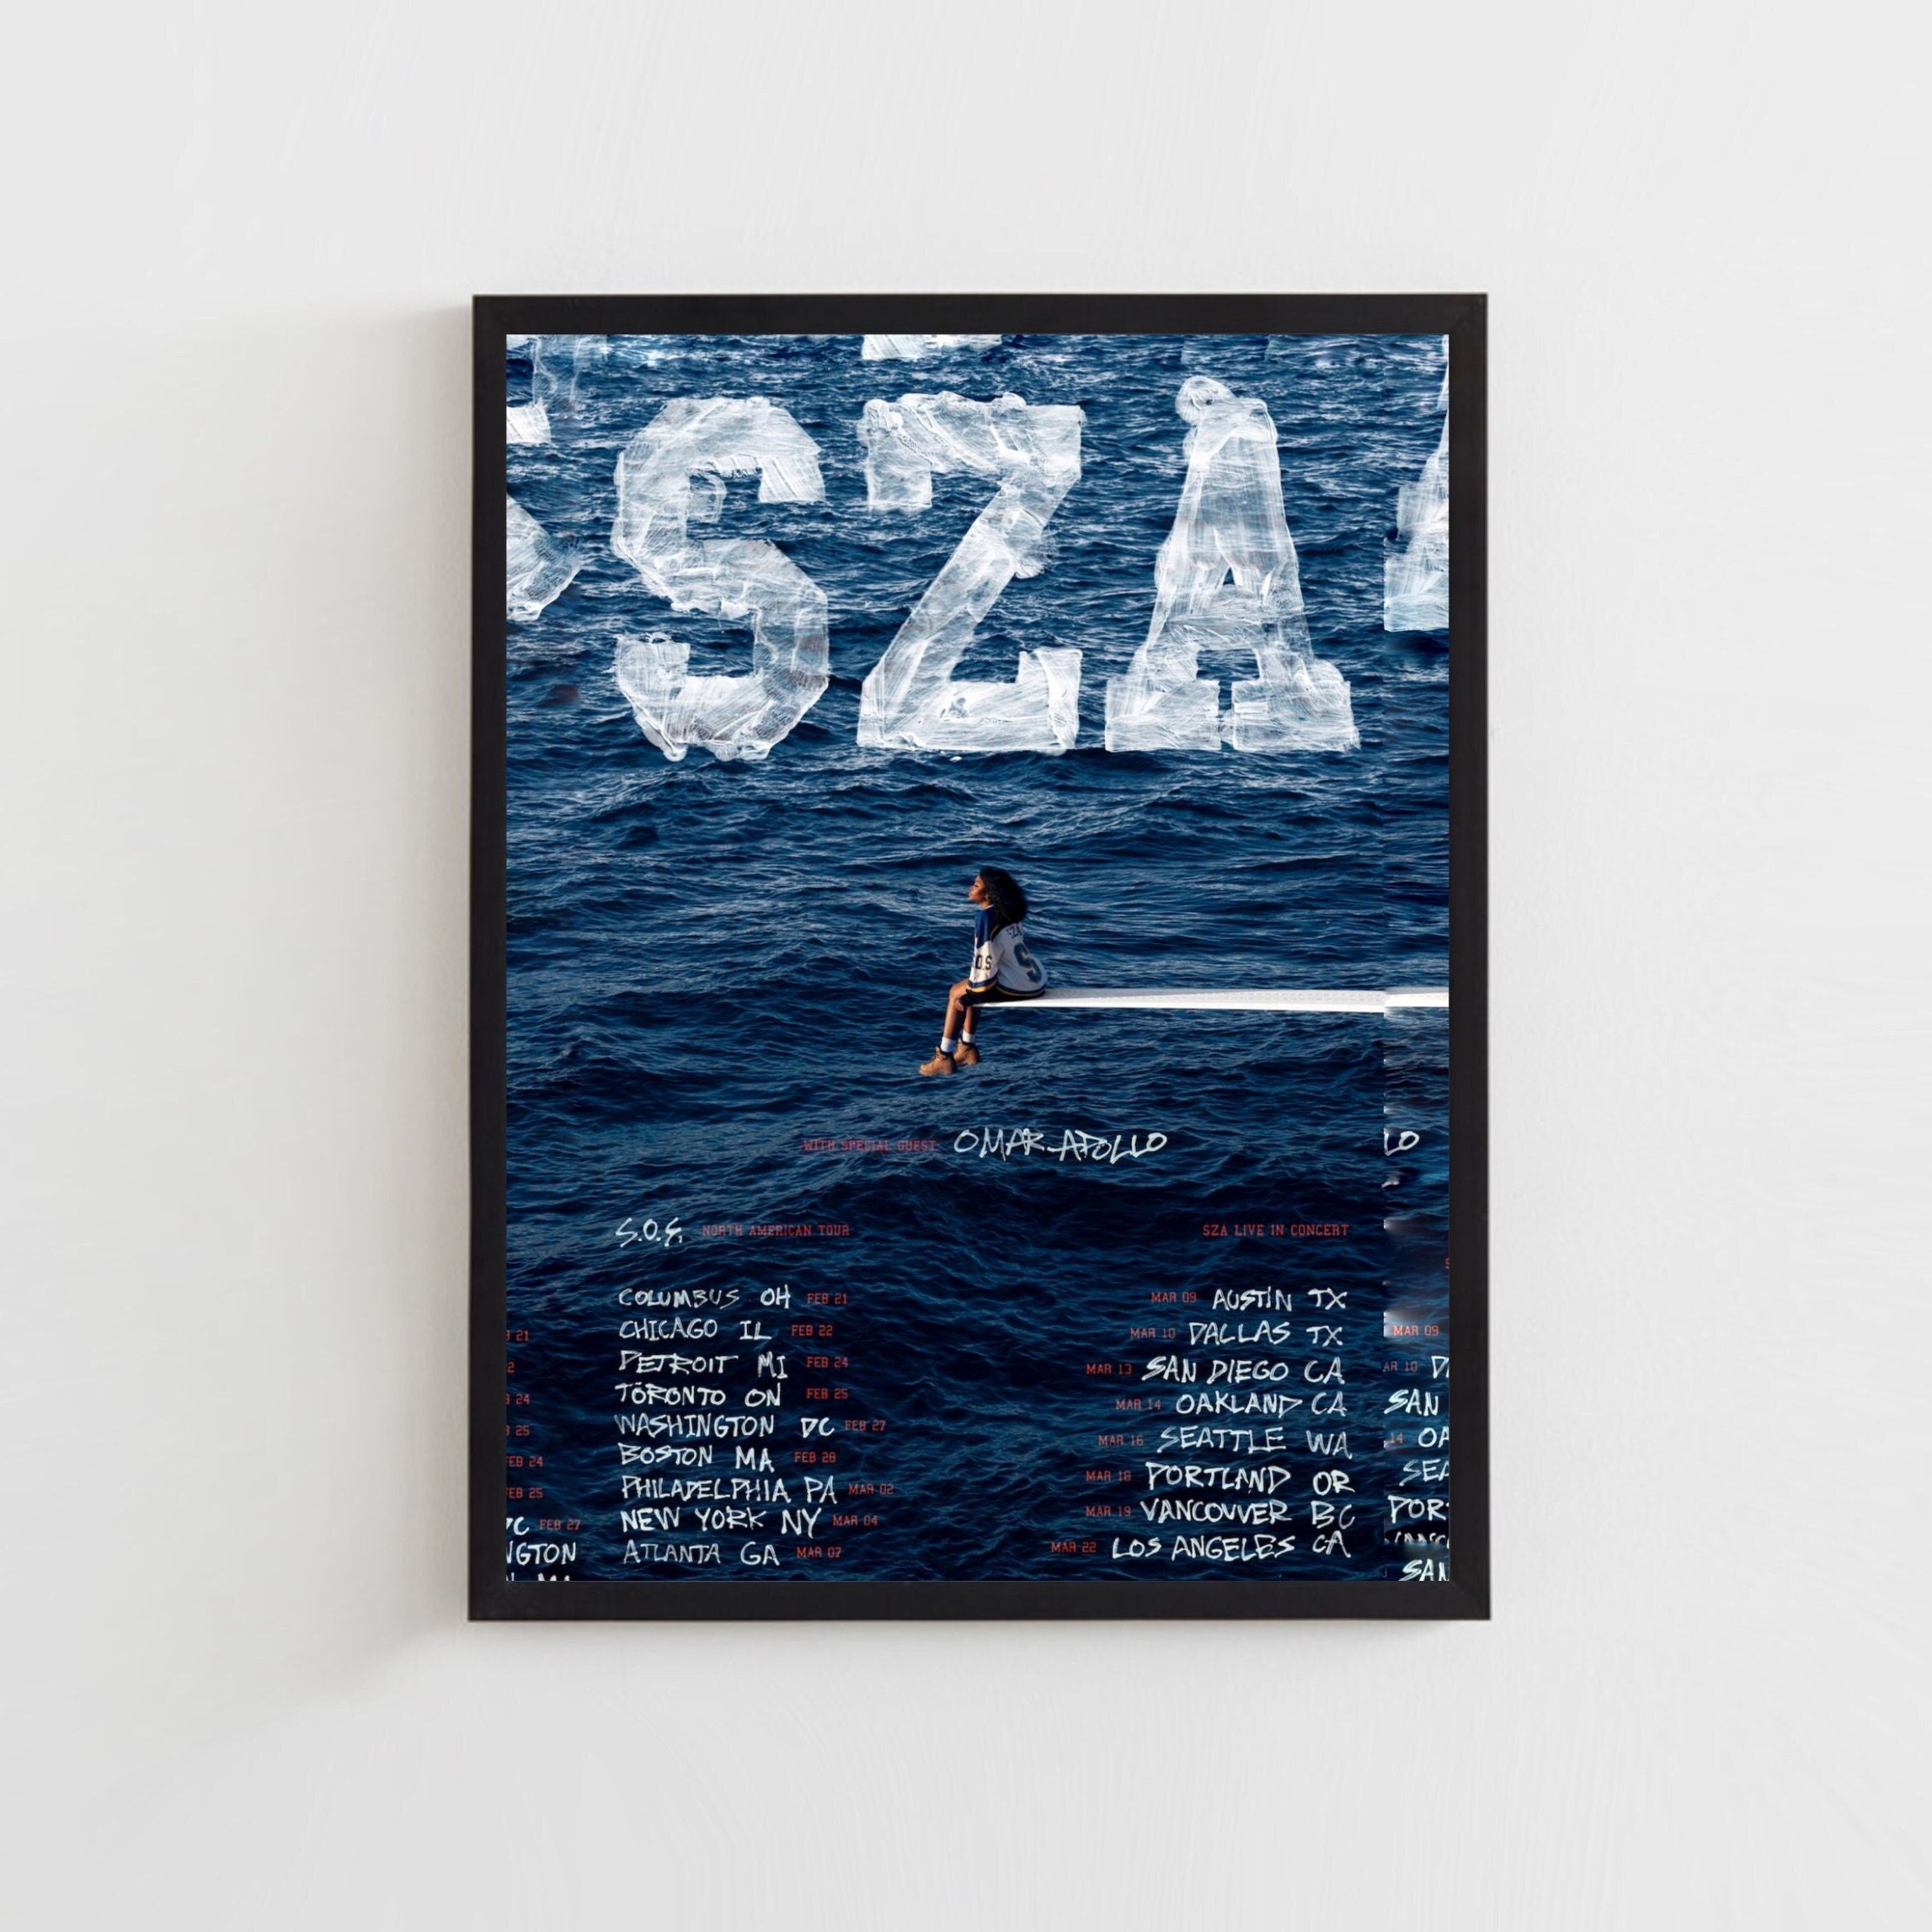 SZA SOS Album Cover Poster Gift for Fans - Happy Place for Music Lovers